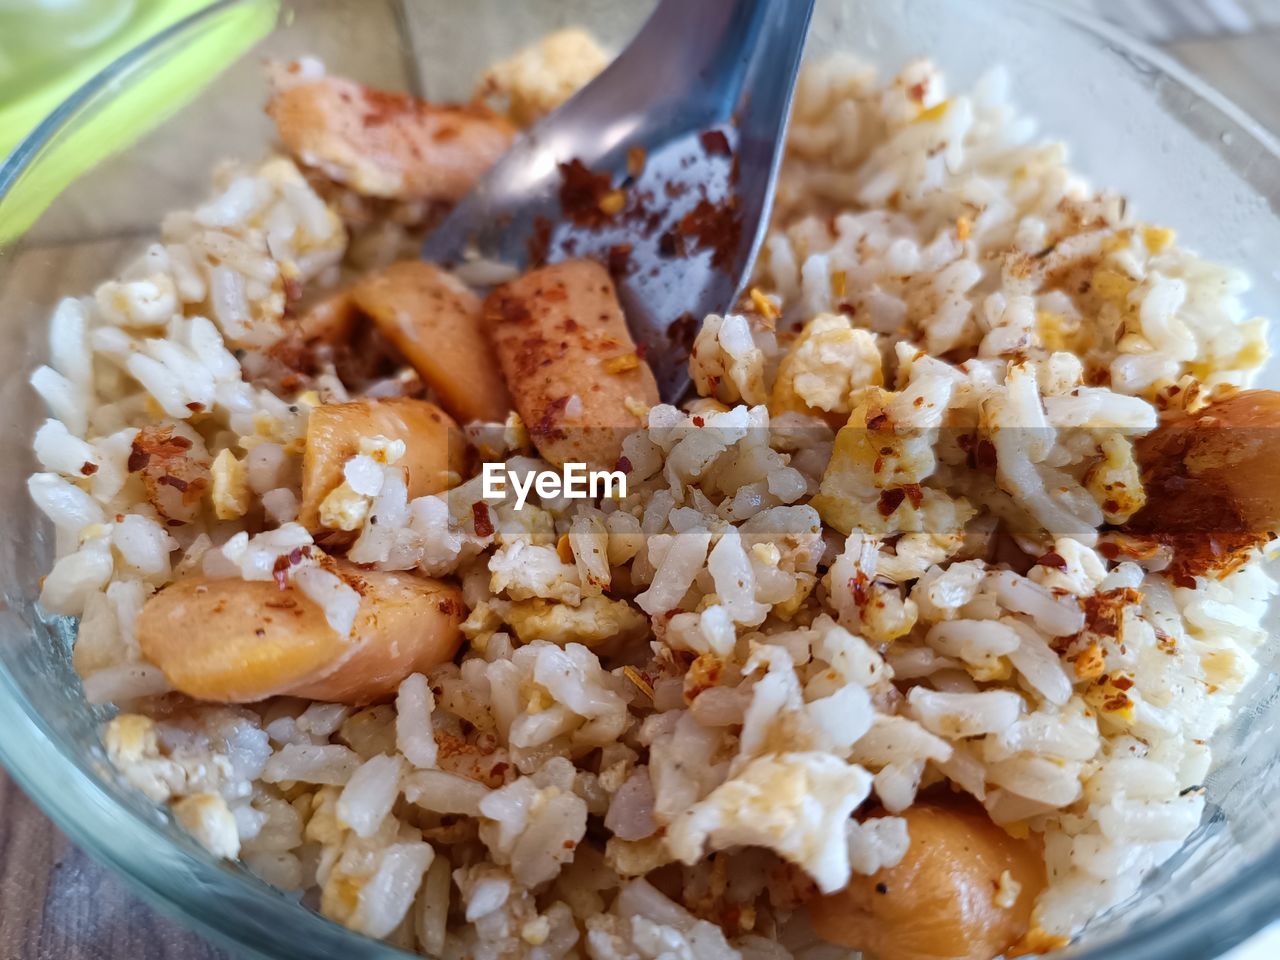 food, food and drink, dish, healthy eating, wellbeing, meal, kitchen utensil, freshness, bowl, rice - food staple, eating utensil, cuisine, spoon, produce, breakfast, indoors, close-up, no people, steamed rice, high angle view, asian food